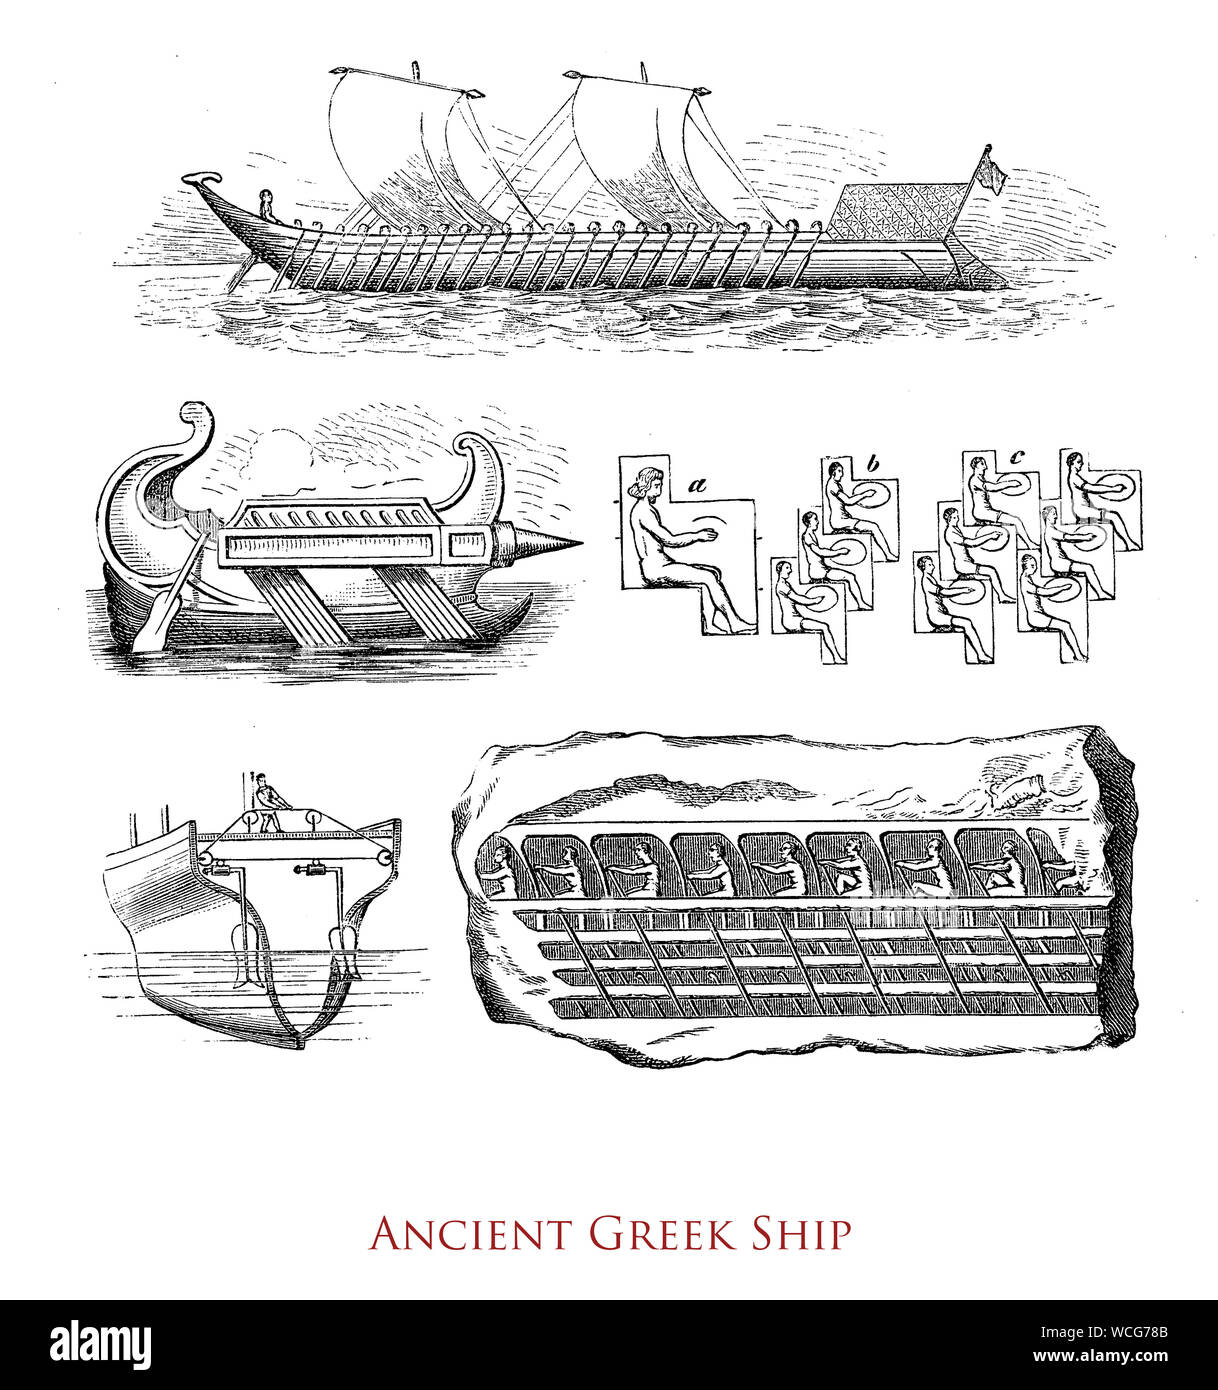 Antiquity: ancient Greek ship, a 'catamaran hull' galley with rows of  rowers and rectangular sails Stock Photo - Alamy